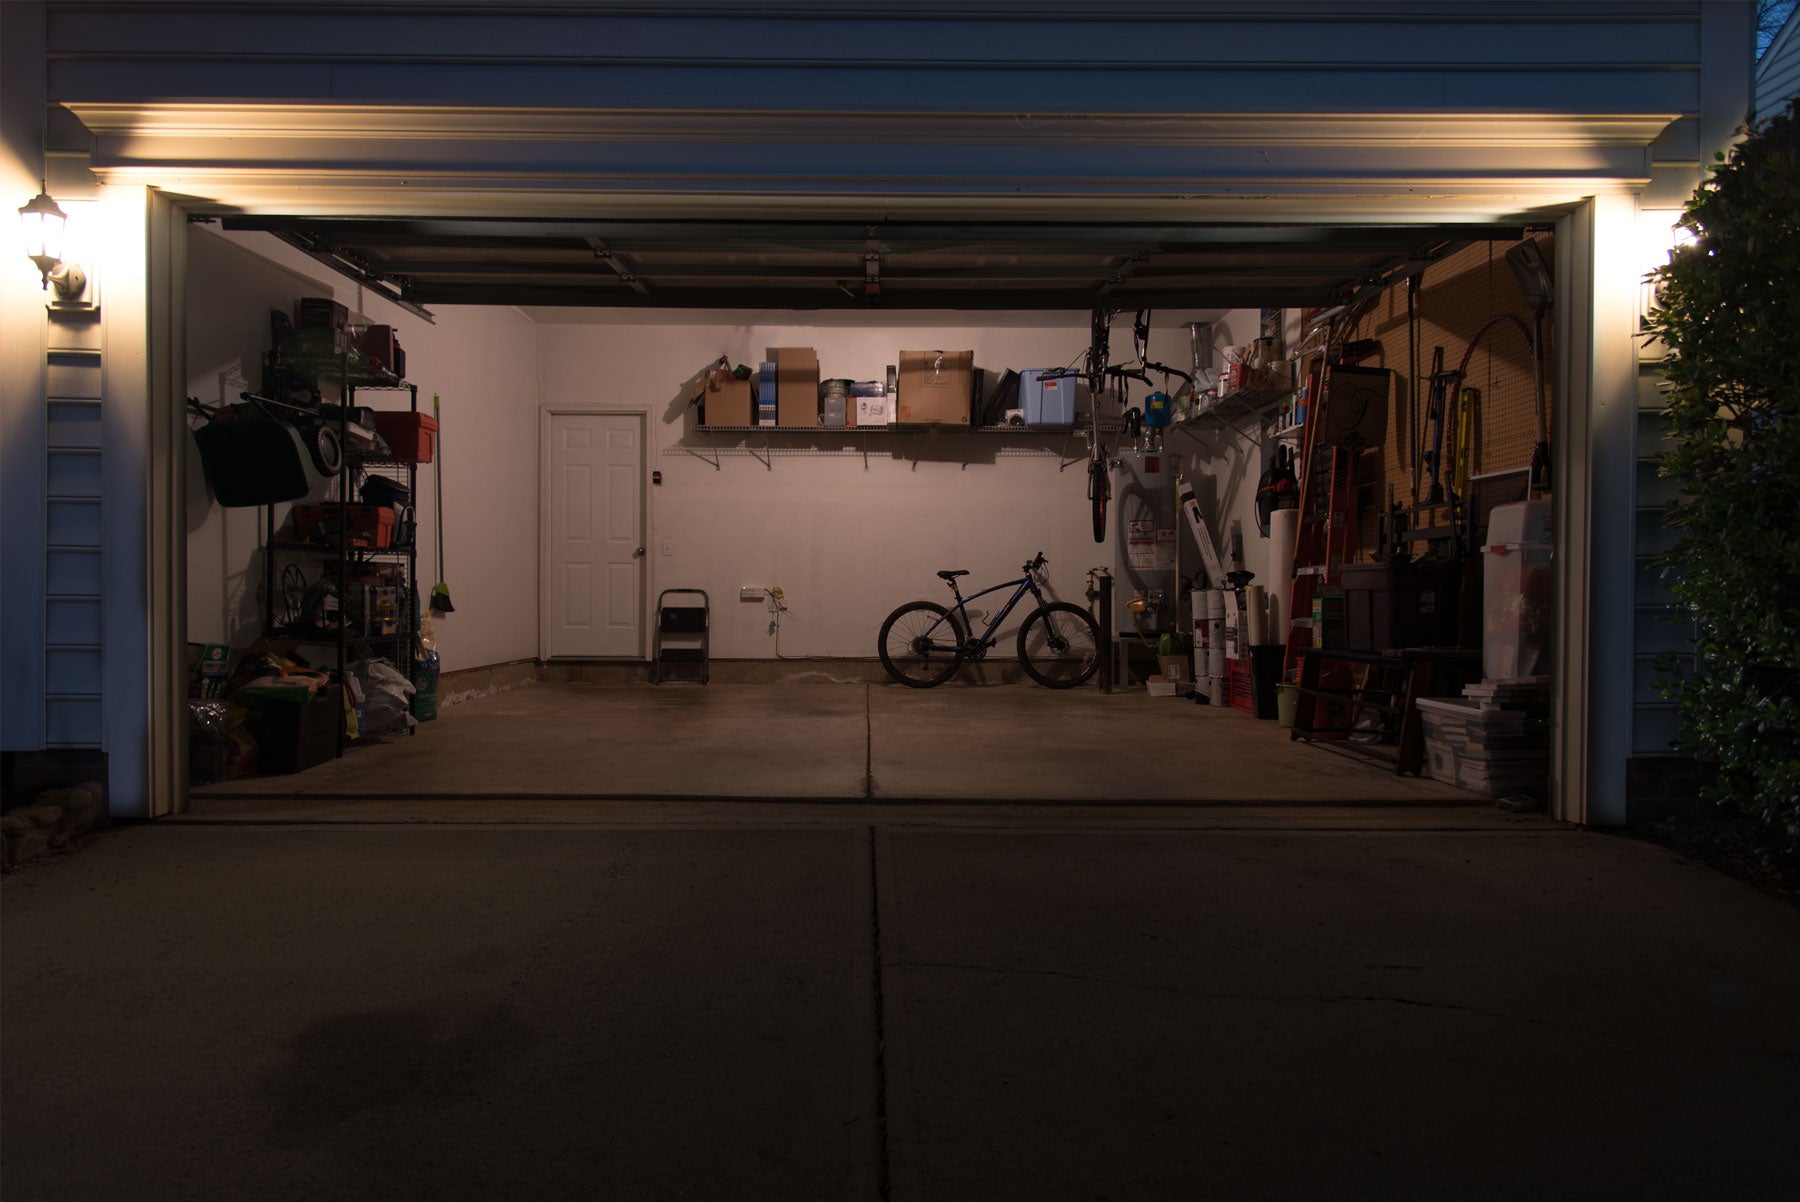 STKR Concepts TRiLIGHT compared to normal bulb in Garage - Incandescent Bulb View